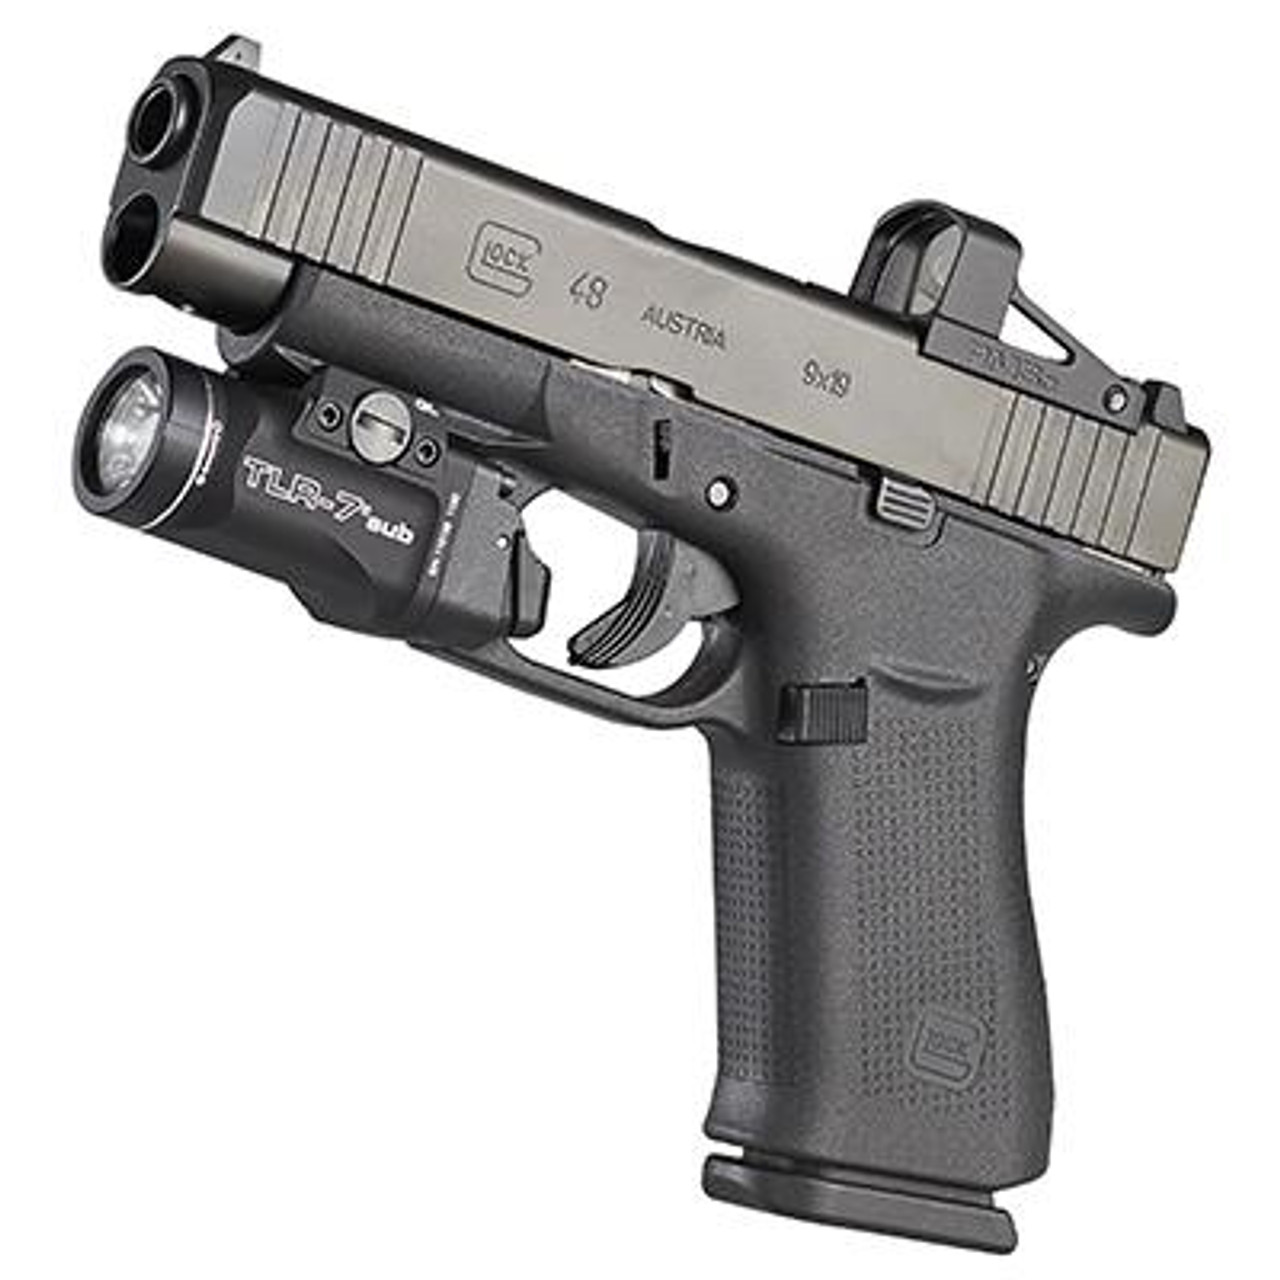 Streamlight TLR-7 Sub Ultra-Compact Tactical Gun Light (for SIG SAUER ...